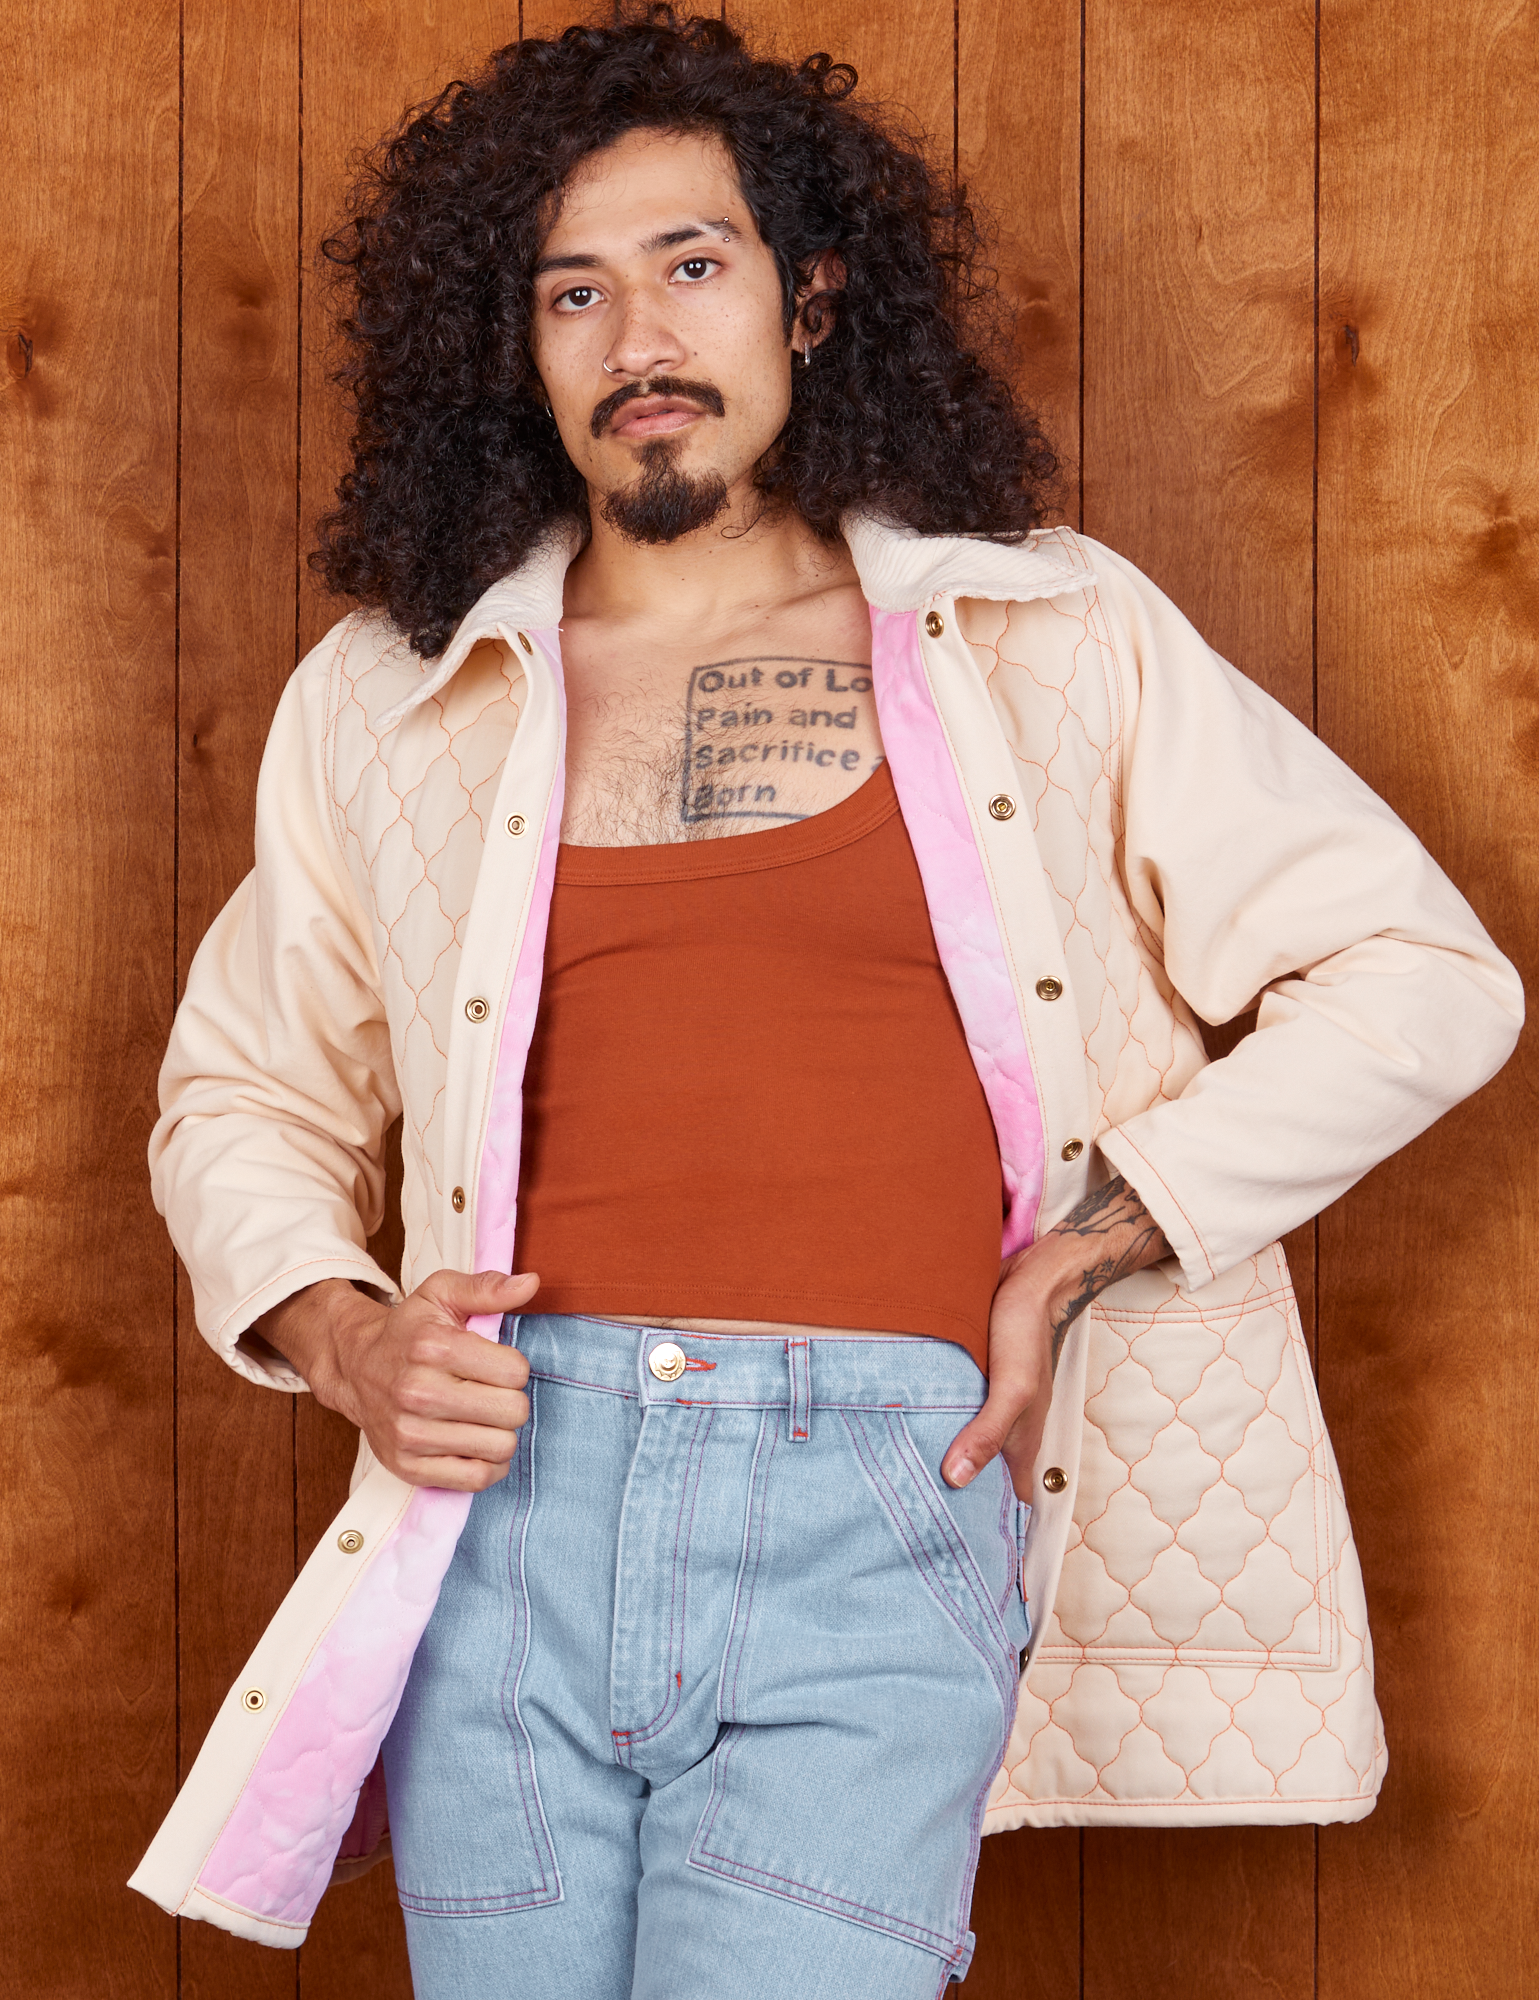 Jesse is wearing Quilted Overcoat in Vintage Off-White, burnt terracotta Cropped Tank Top and light wash Carpenter Jeans